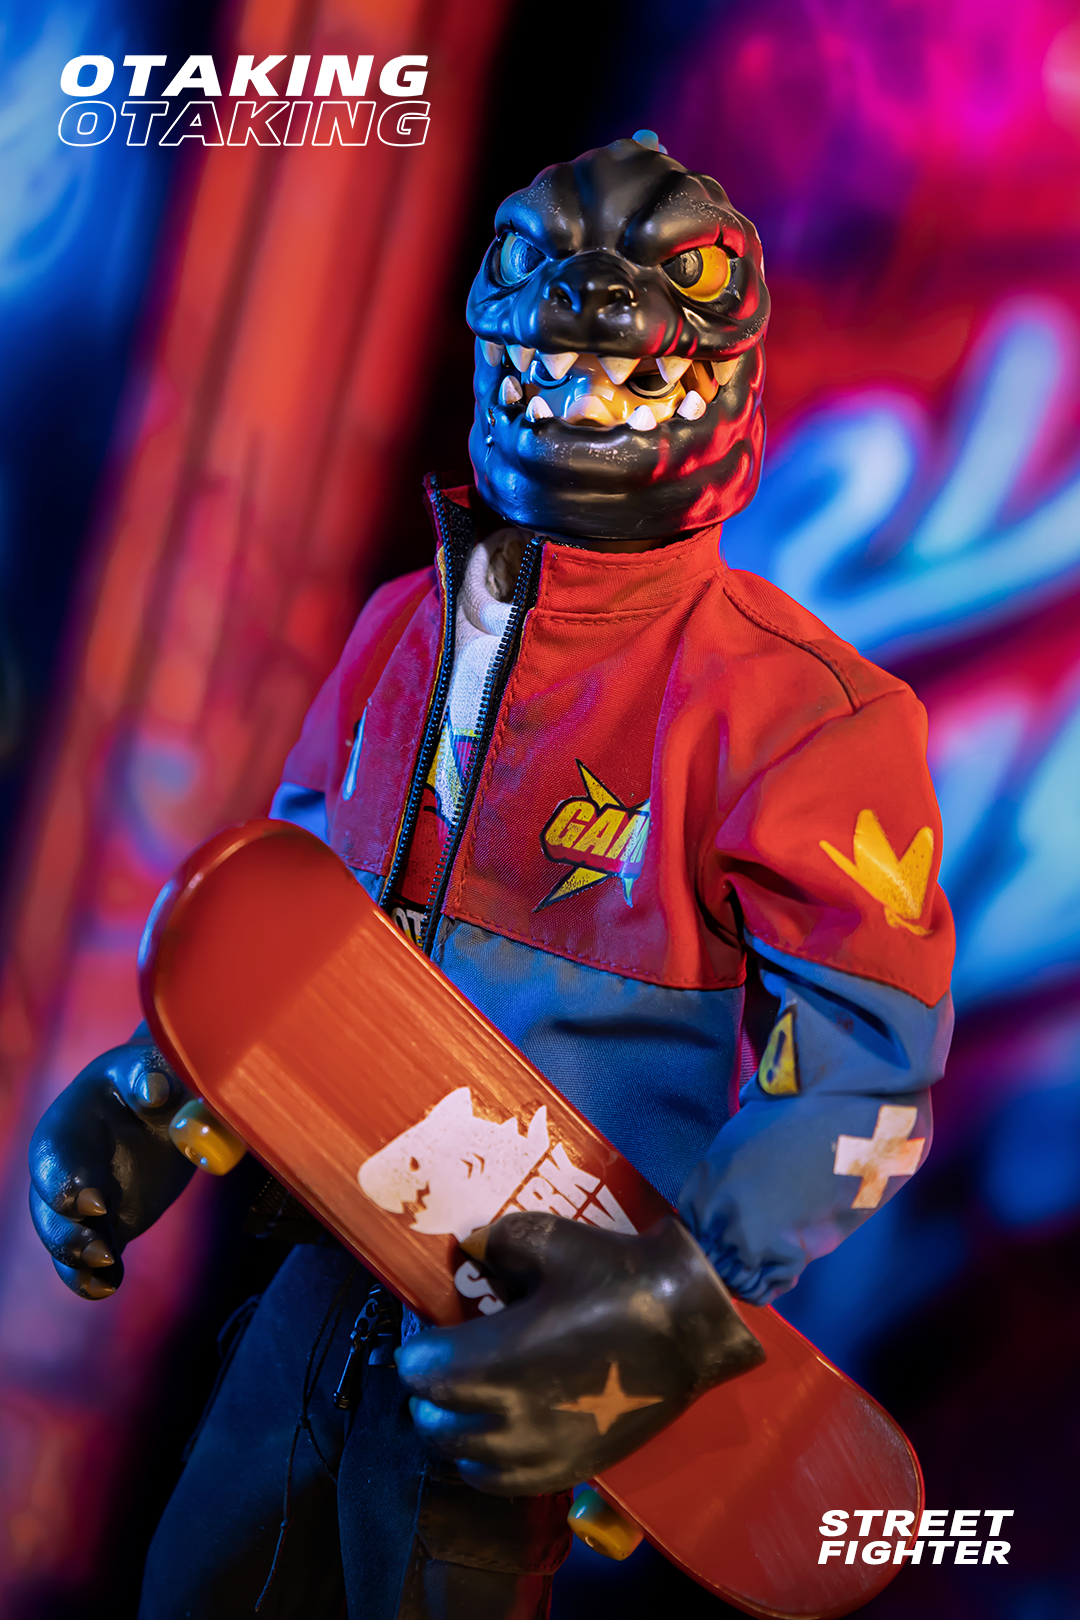 Toy figure holding a skateboard, close-up of logo and bird's arm from OTAKING - Street Fighter product image.